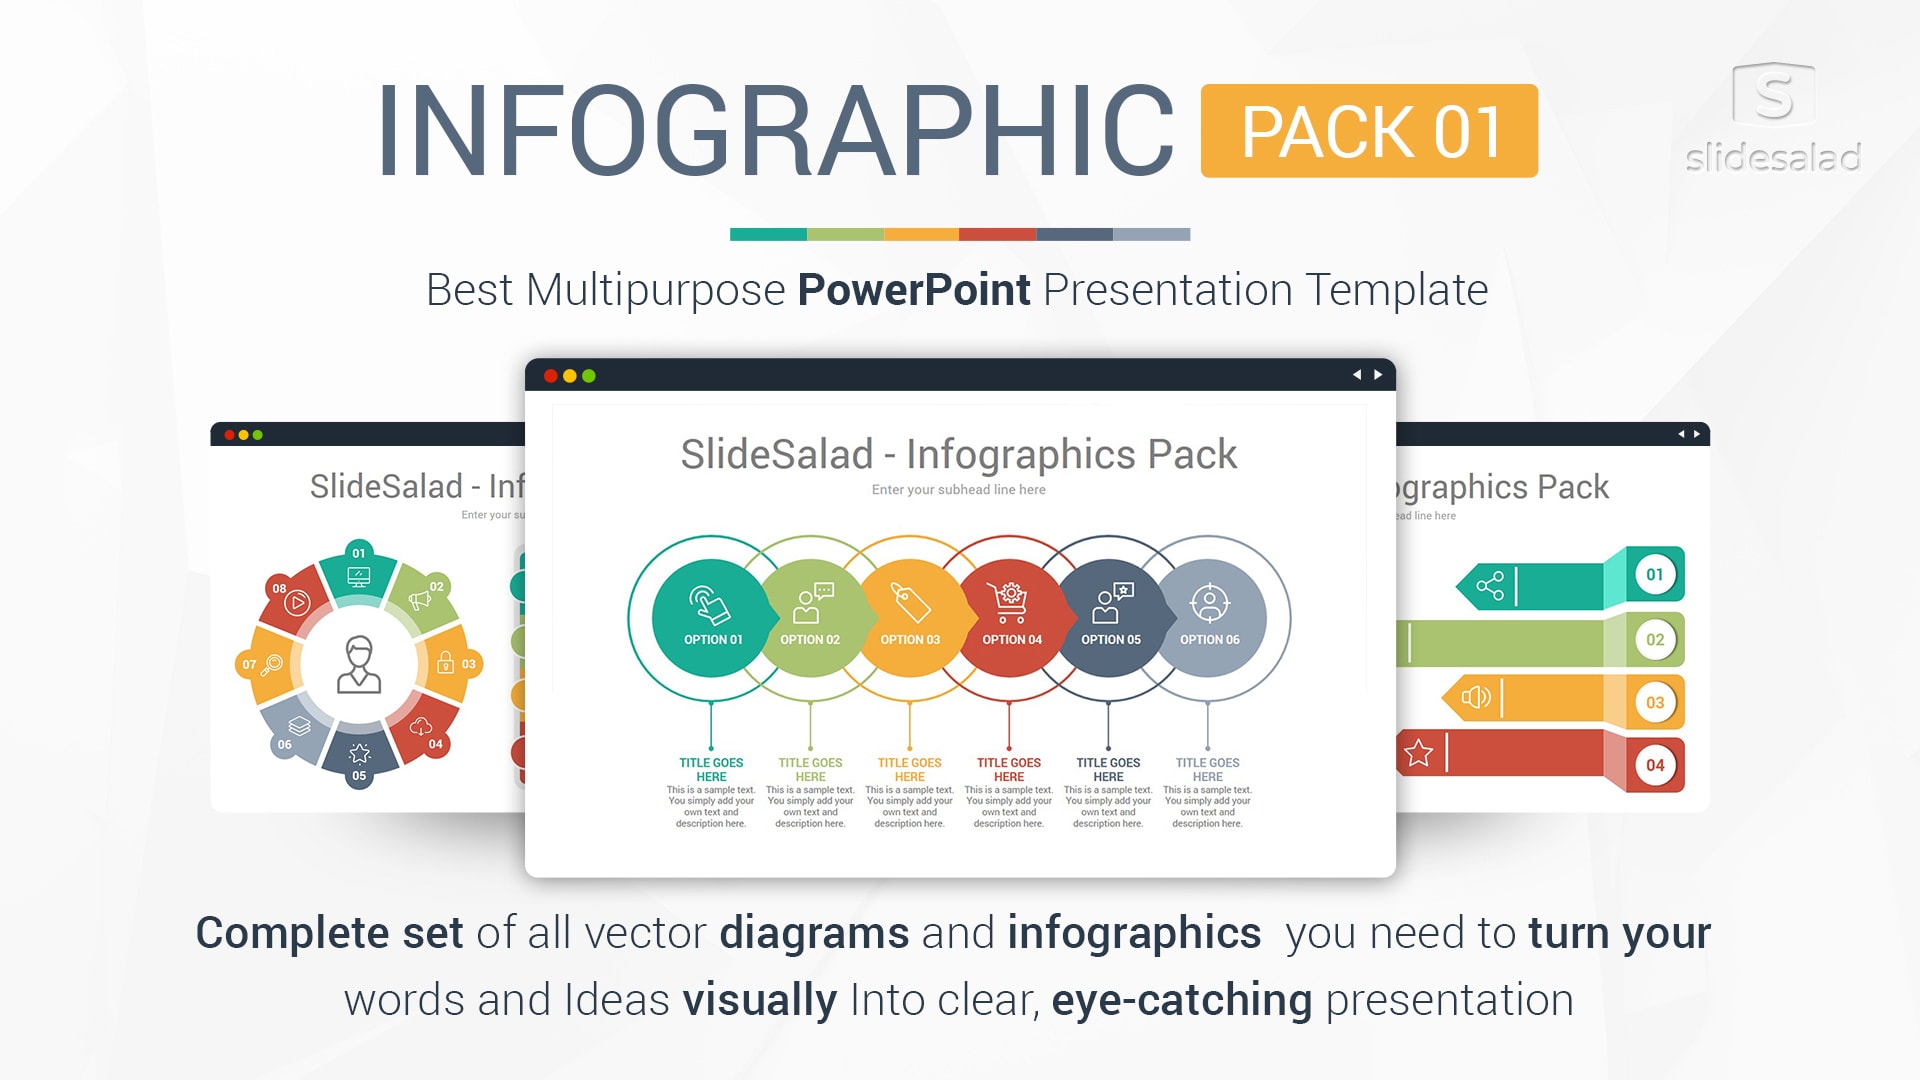 Infographic Designs Pack 01 PowerPoint Template For Presentations